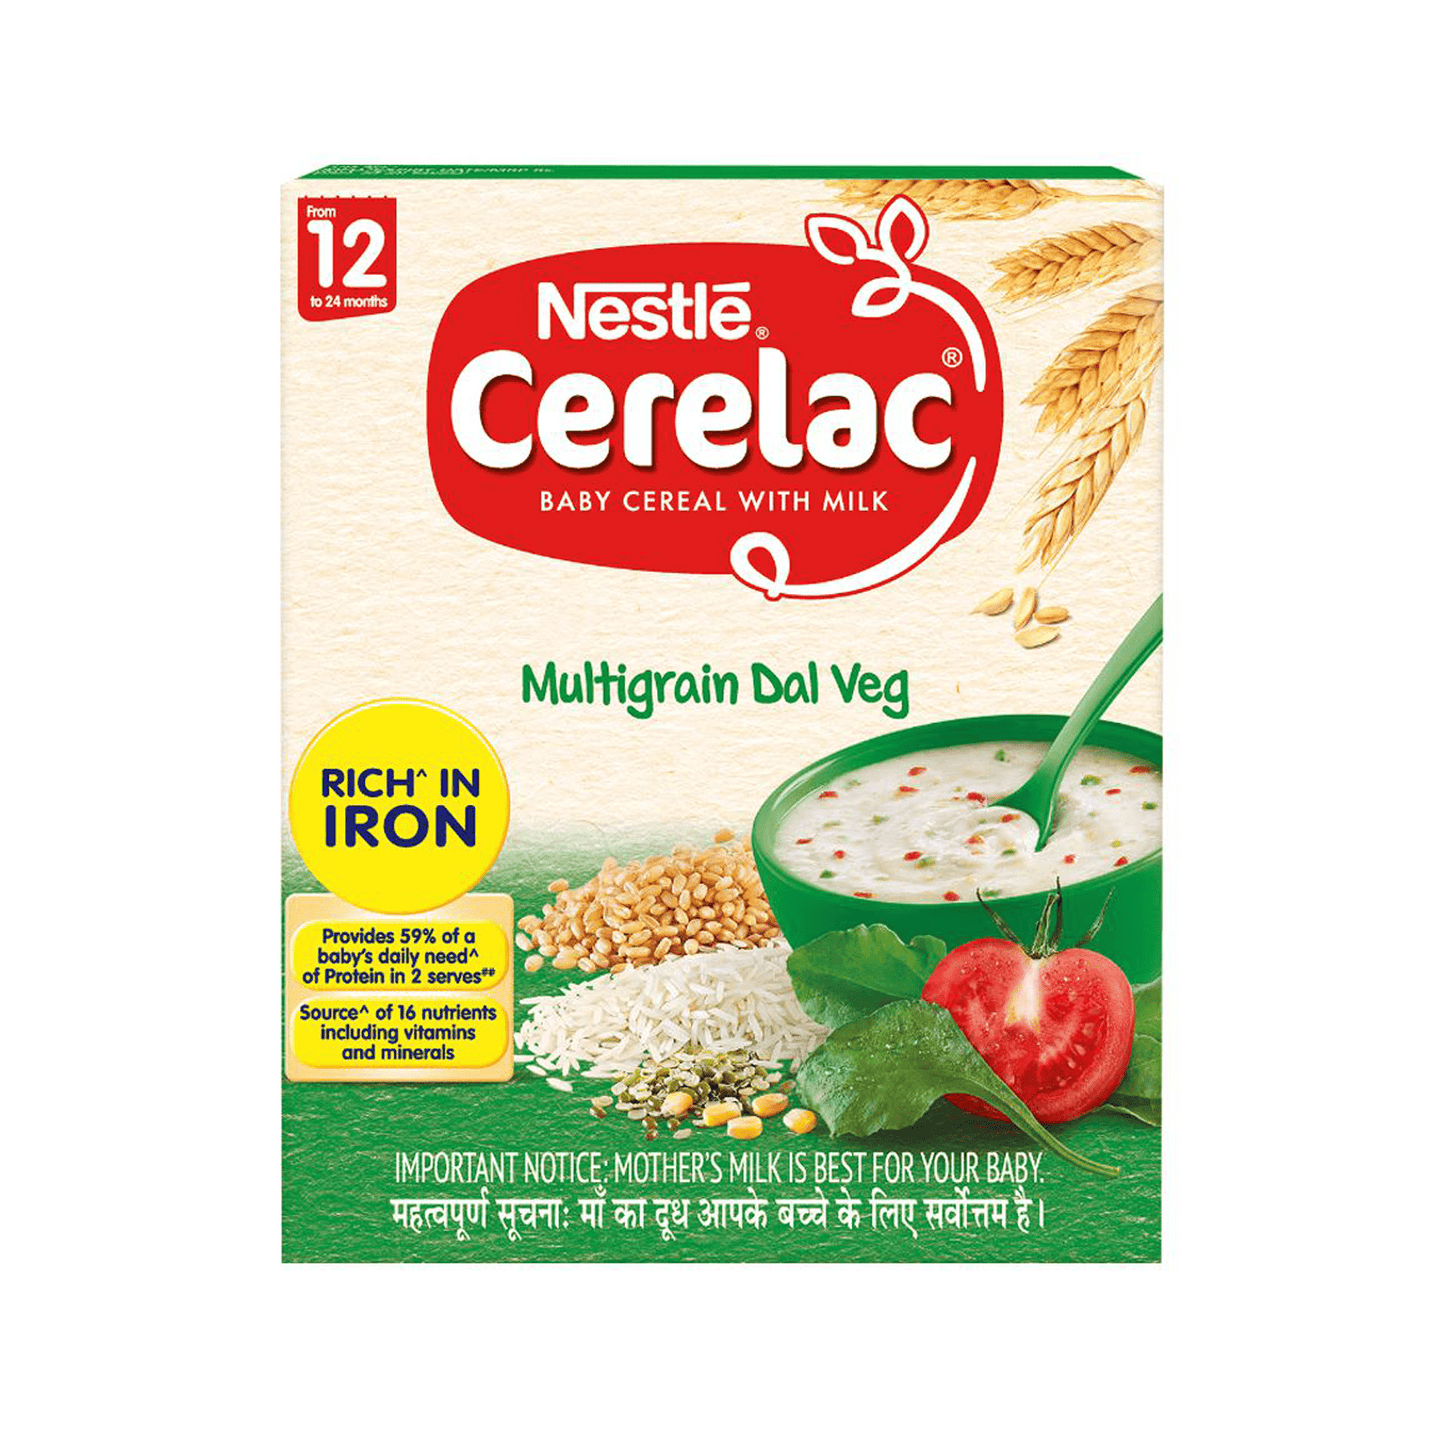 Nestle Cerelac with Milk - Multigrain Dal Veg | From 12-24 Months.